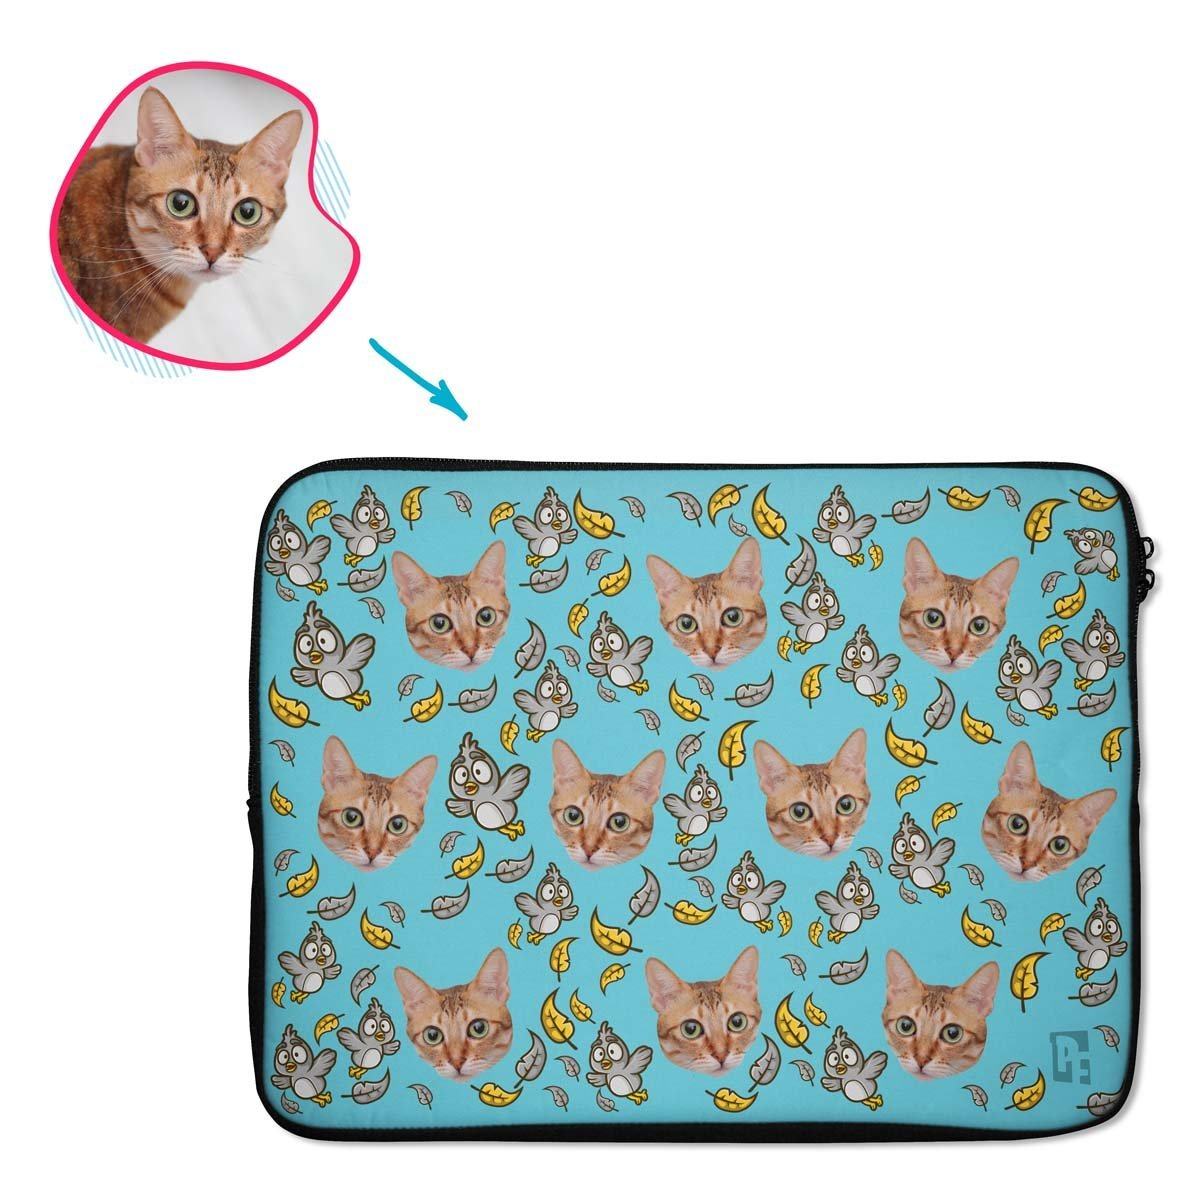 blue Bird laptop sleeve personalized with photo of face printed on them